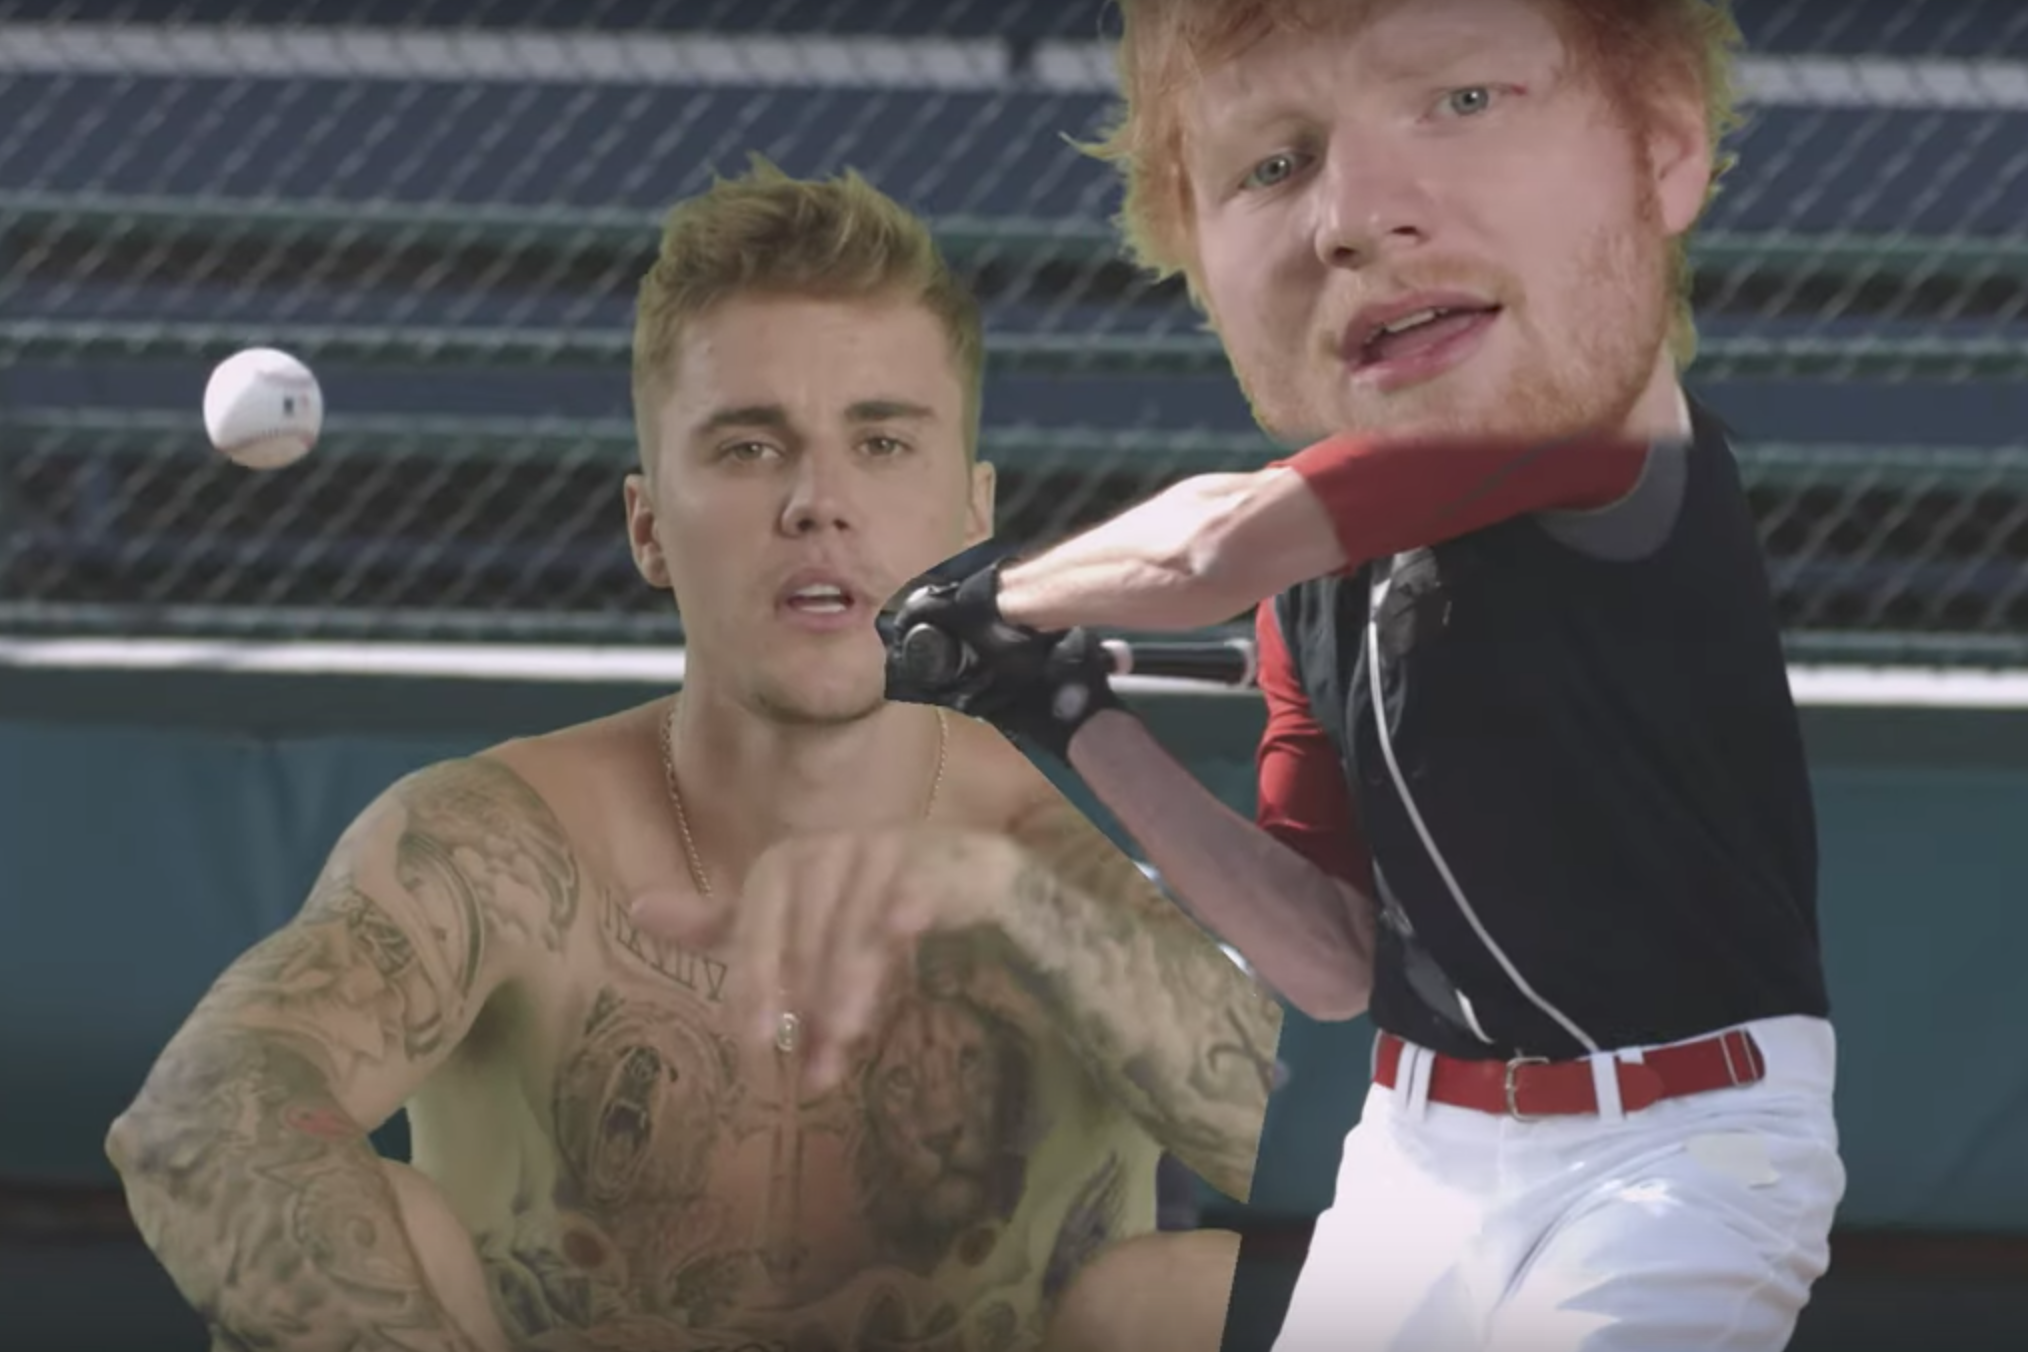 Justin Bieber and Ed Sheeran release video for new song 'I Don't Care' | The Independent2028 x 1352